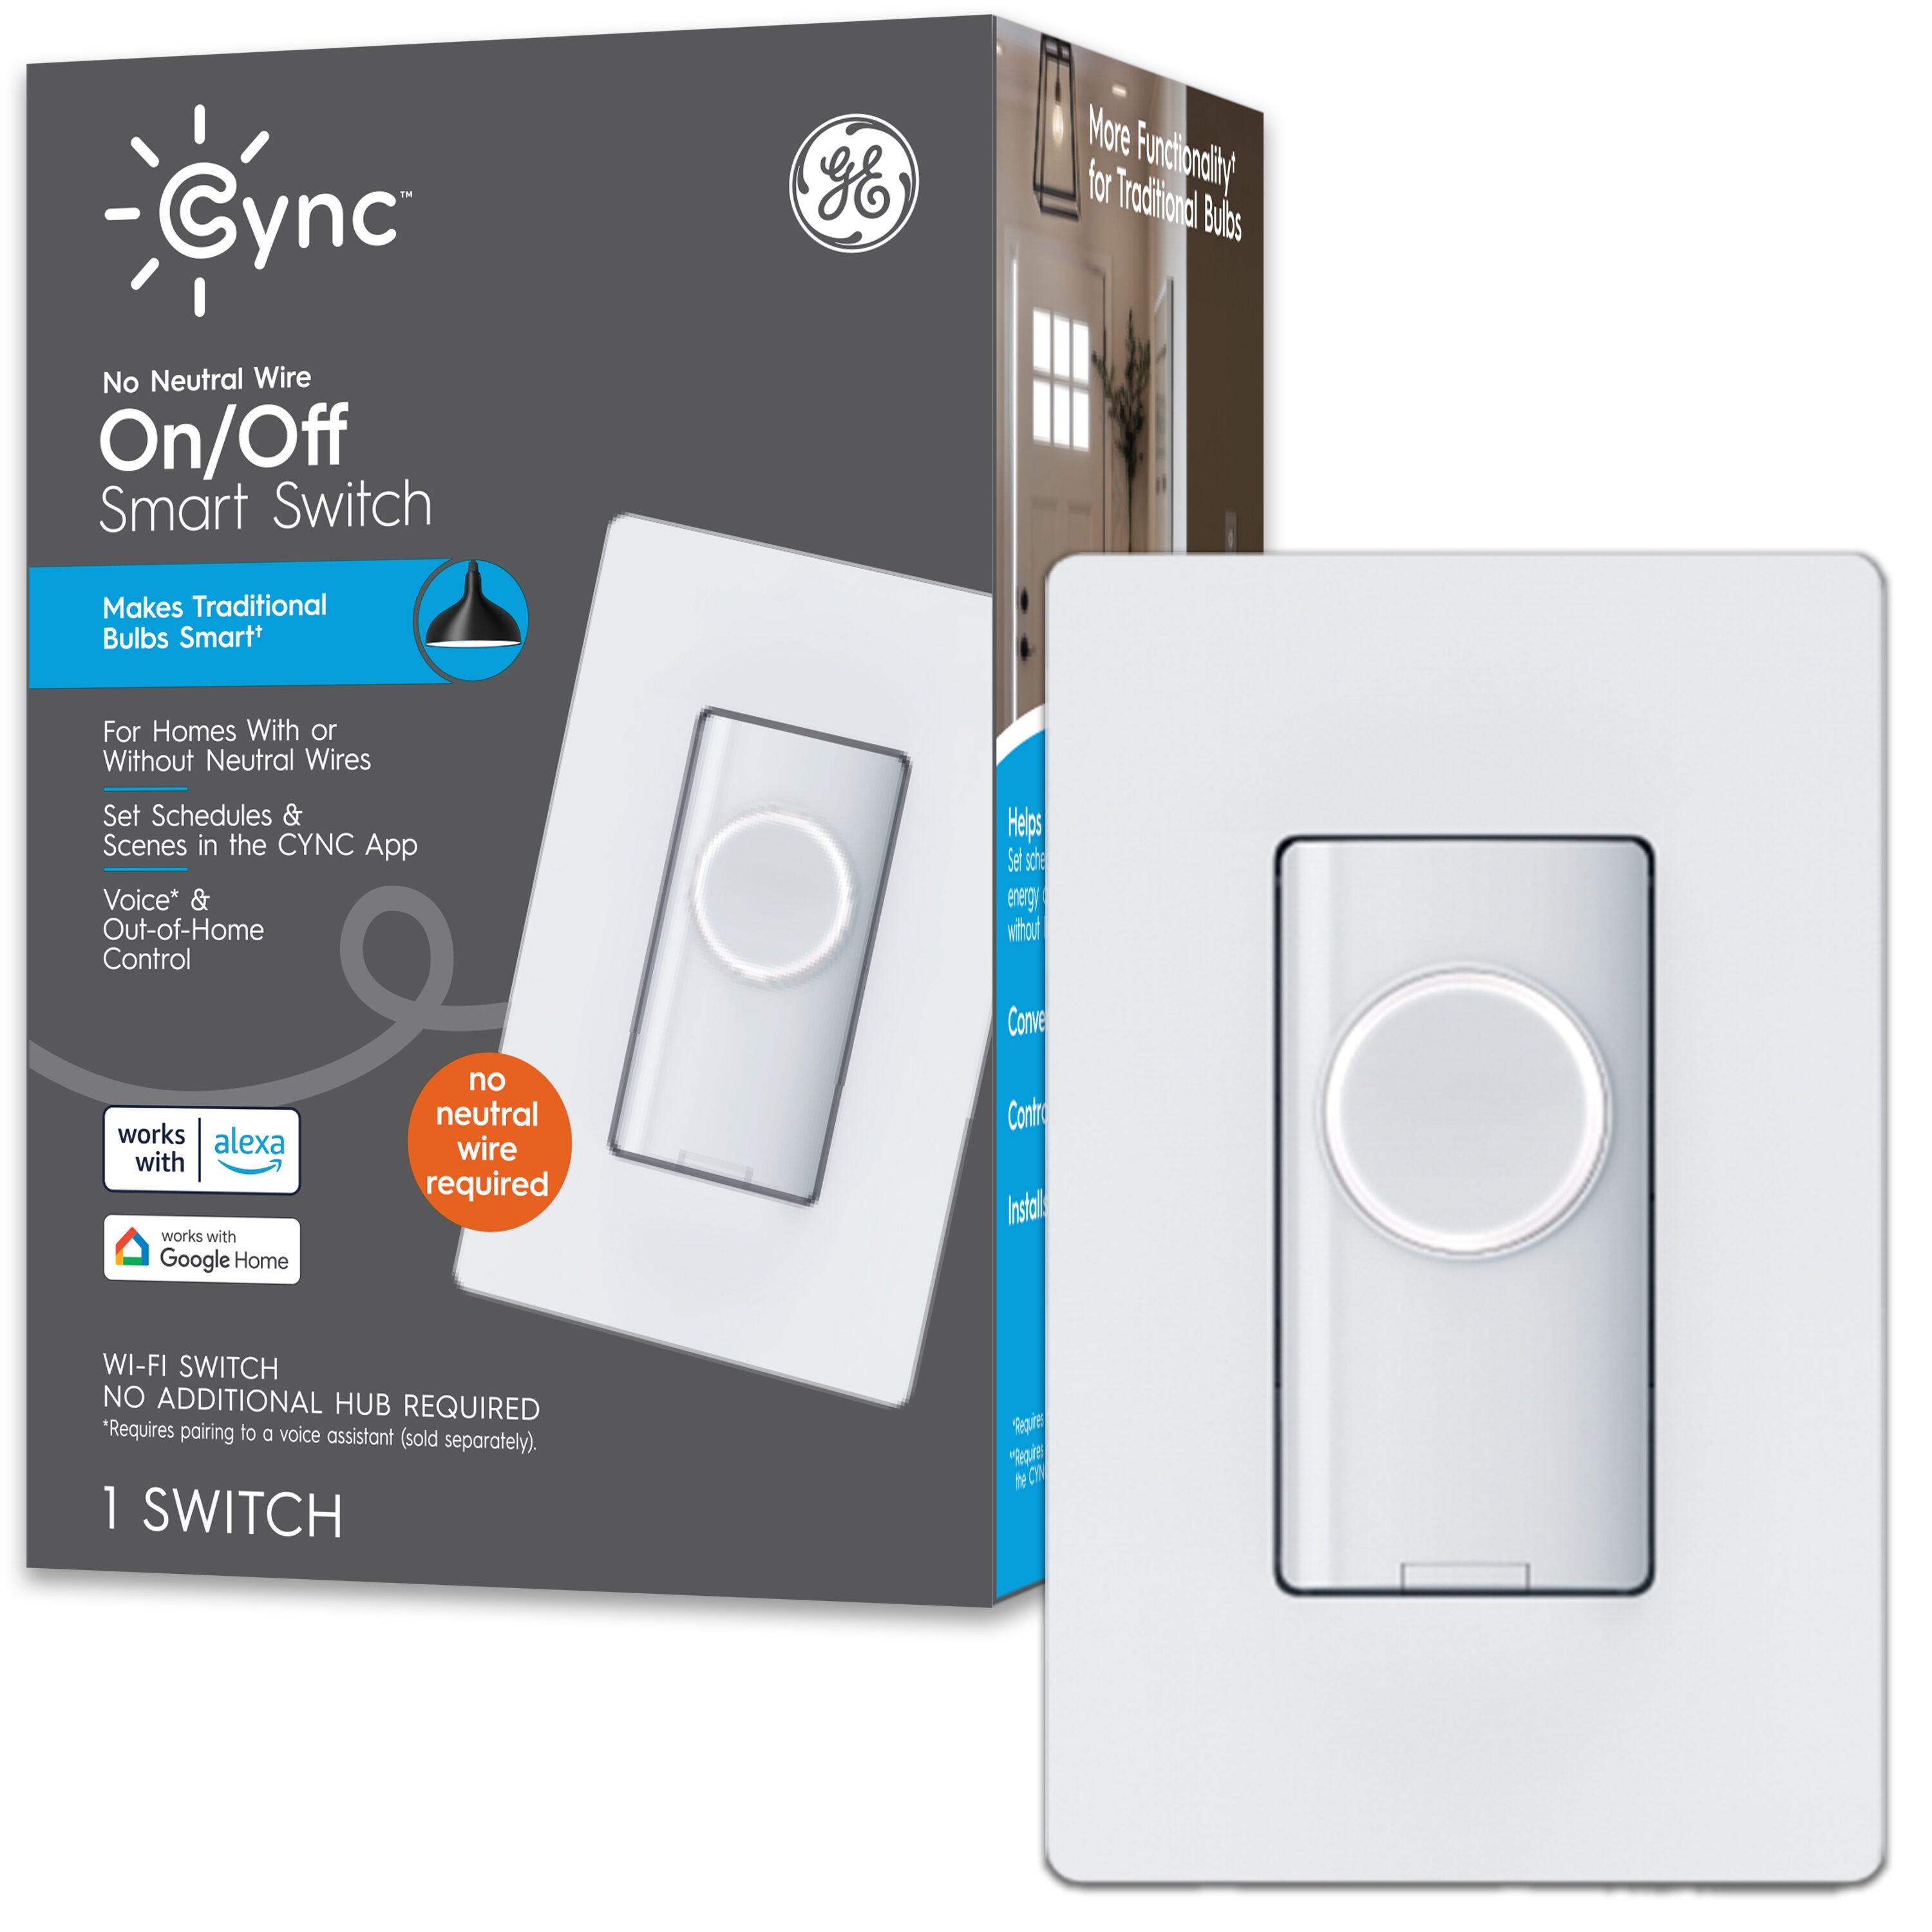 type Transistor avis GE Cync No Neutral Wire-On-Off Button 1.5-amp Single-pole/3-way Smart  Illuminated Touch Light Switch with Wall Plate, White in the Light Switches  department at Lowes.com